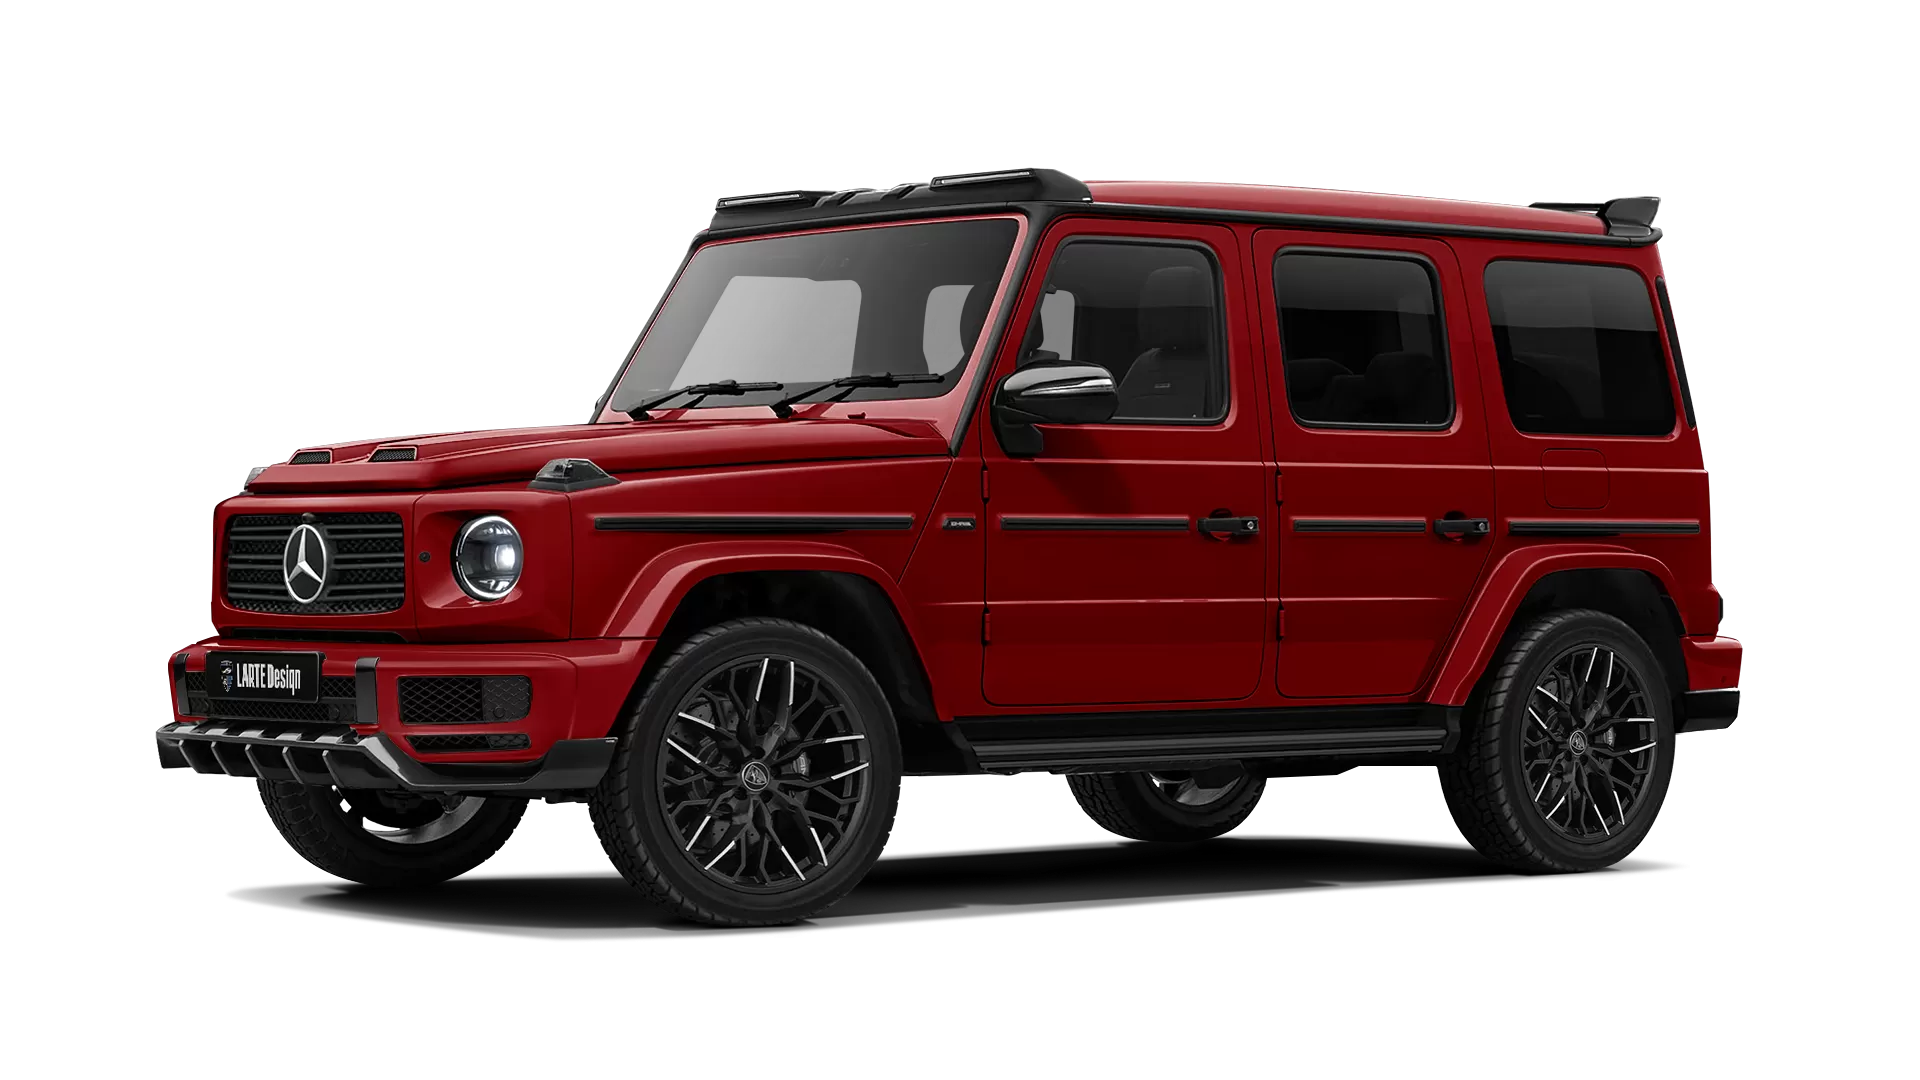 Mercedes G class W463 with painted body kit: front view shown in Jupiter Red